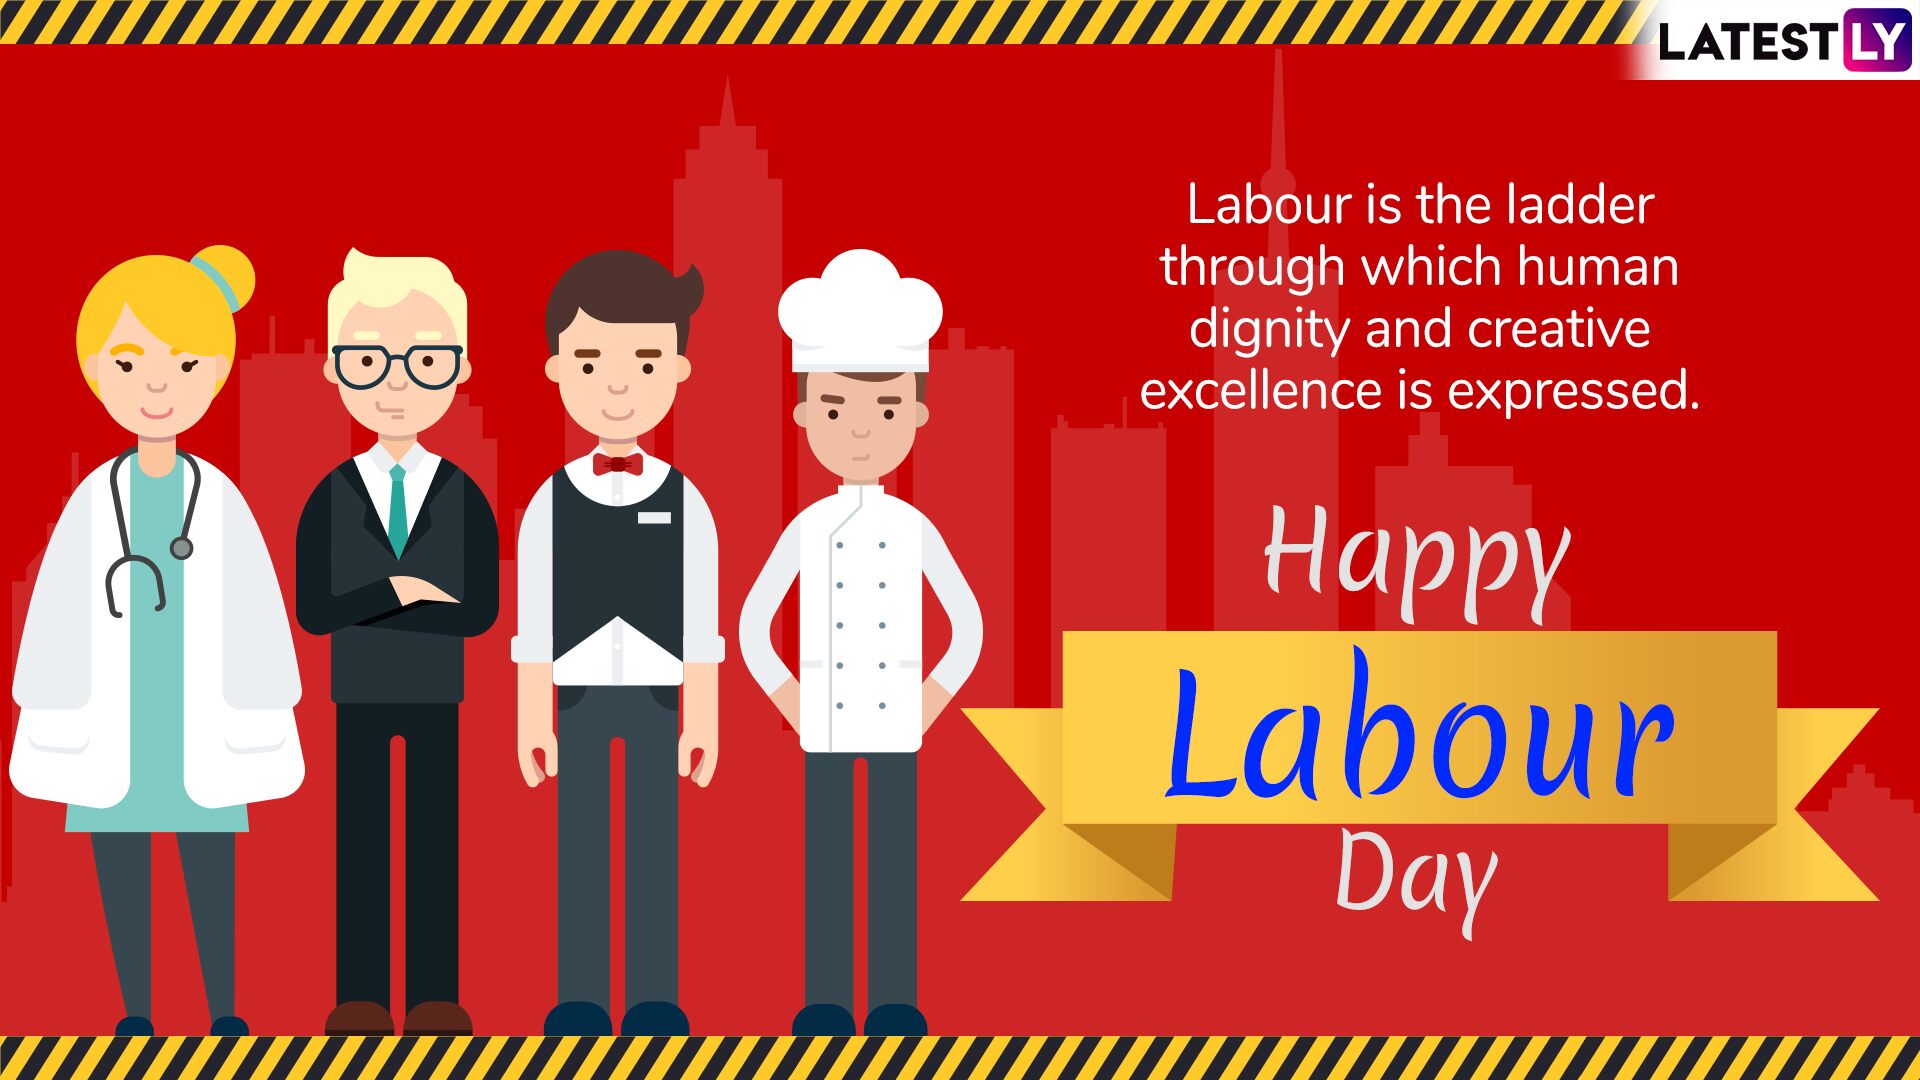 Happy Labor Day 2019 Wishes - Happy Labor Day 2019 , HD Wallpaper & Backgrounds